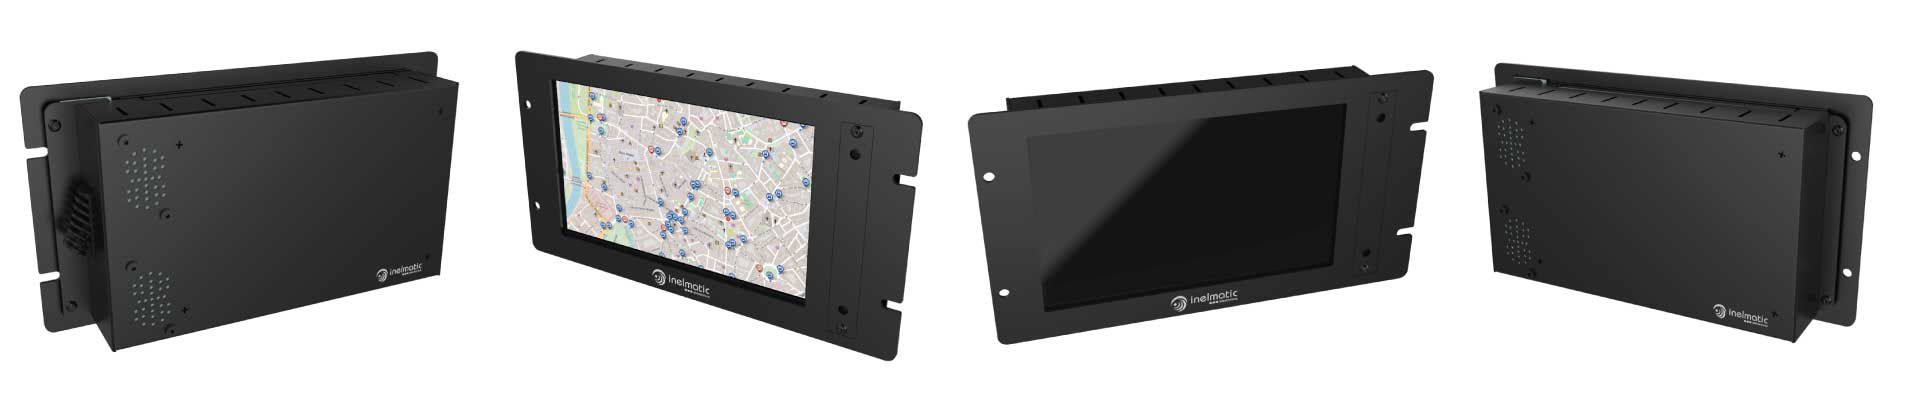 industrial grade open frame monitors, from 7&quot; to 42&quot; - Inelmatic